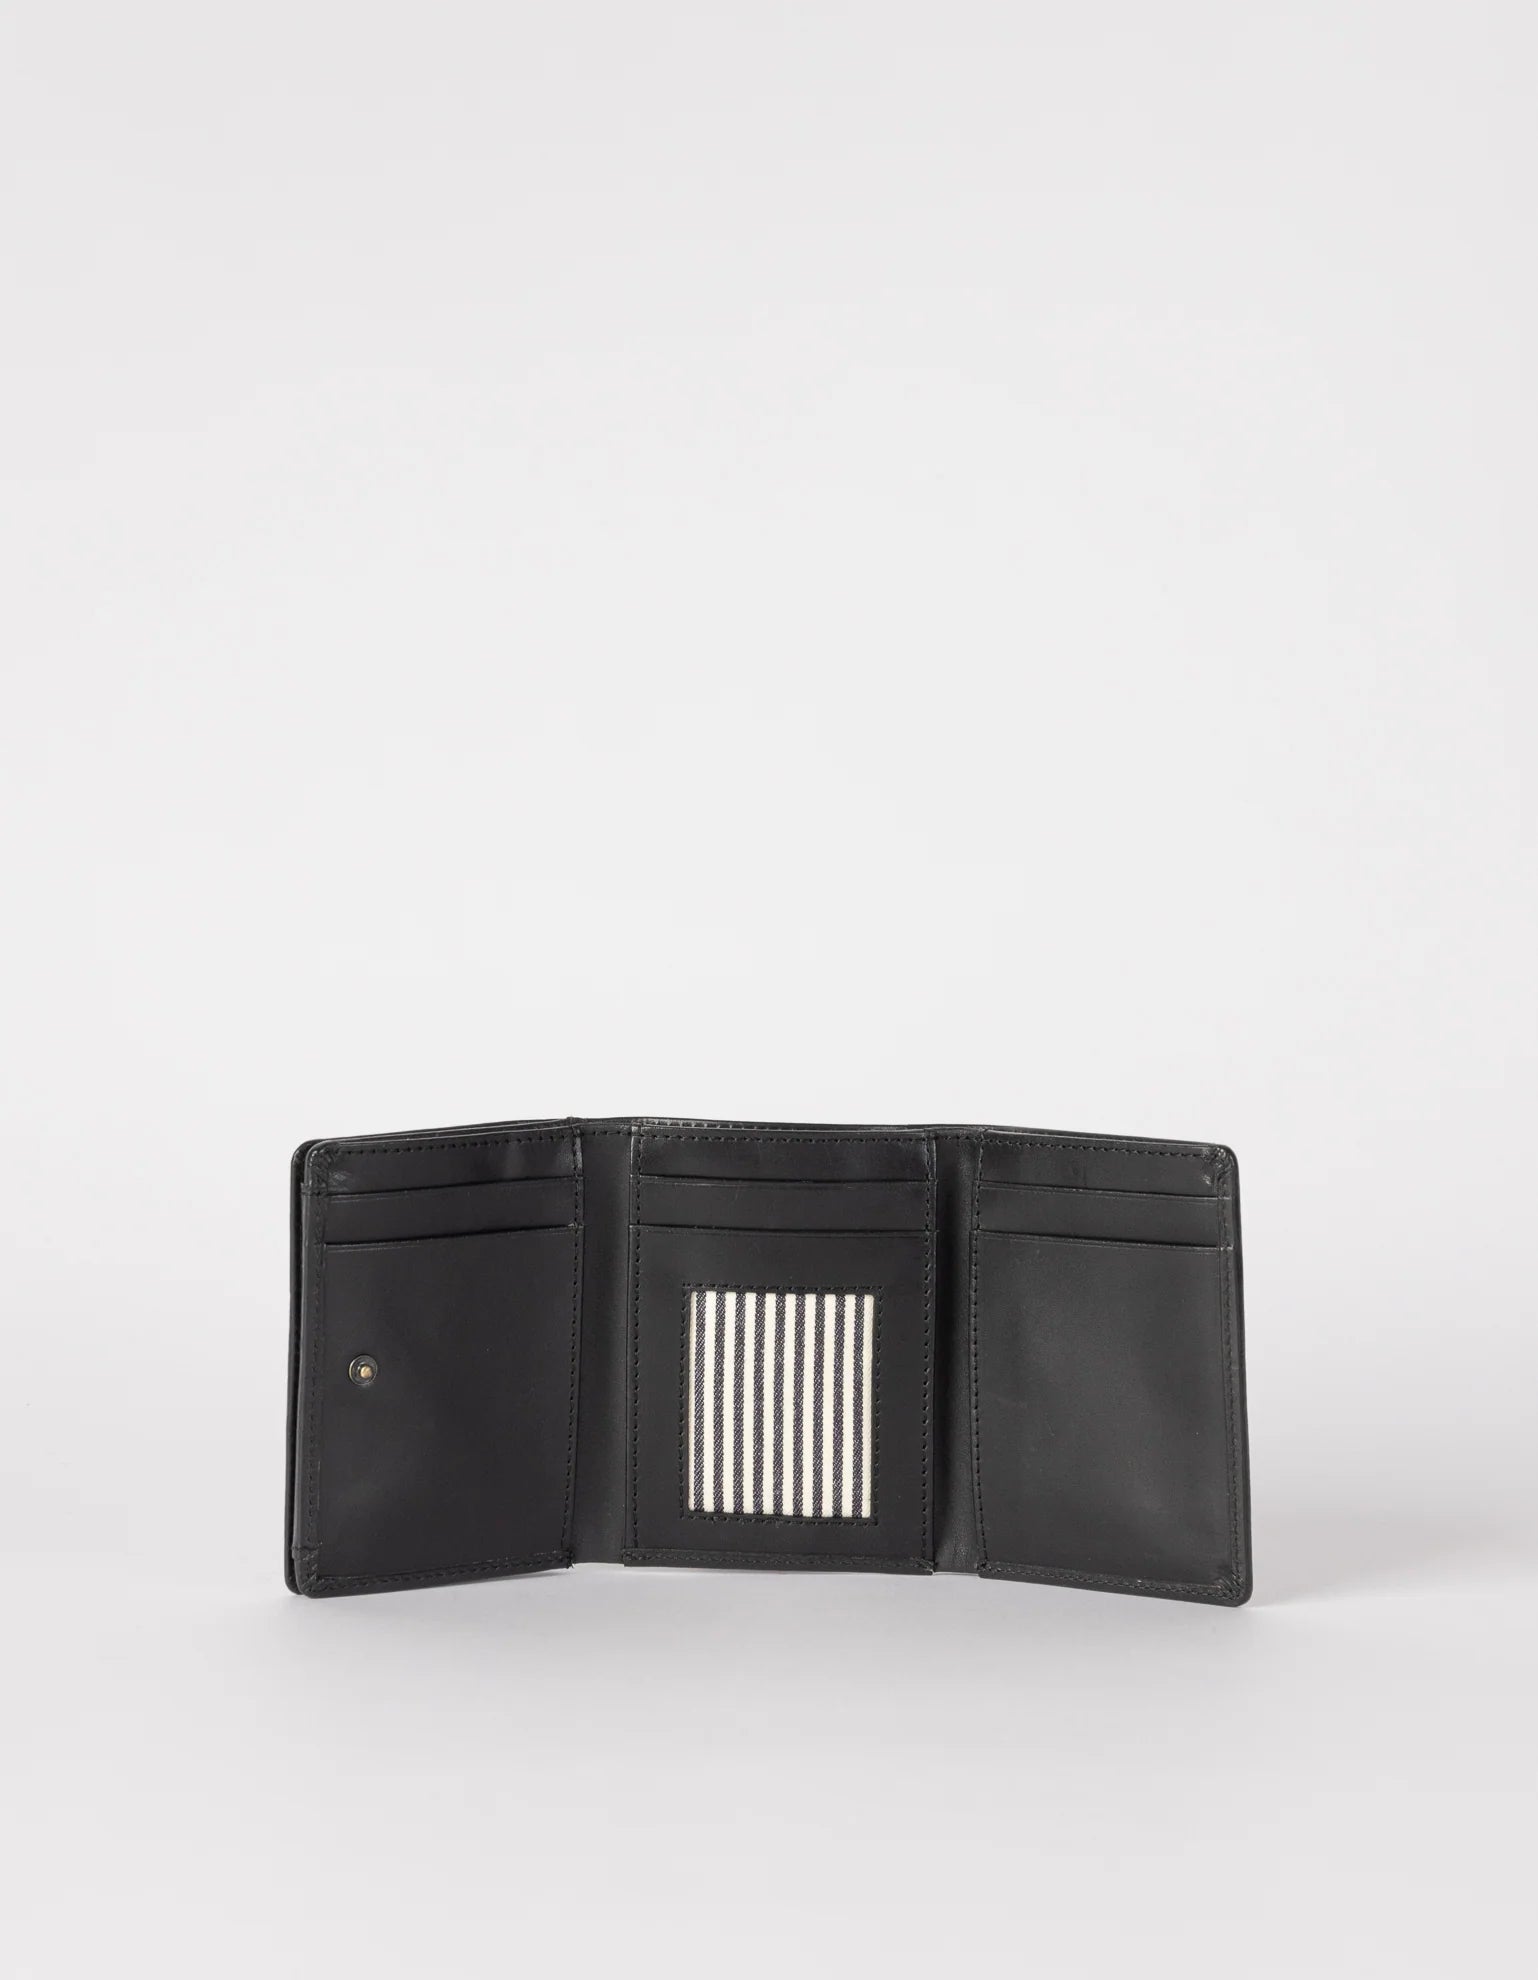 O MY BAG Ollie Wallet Black Classic Leather